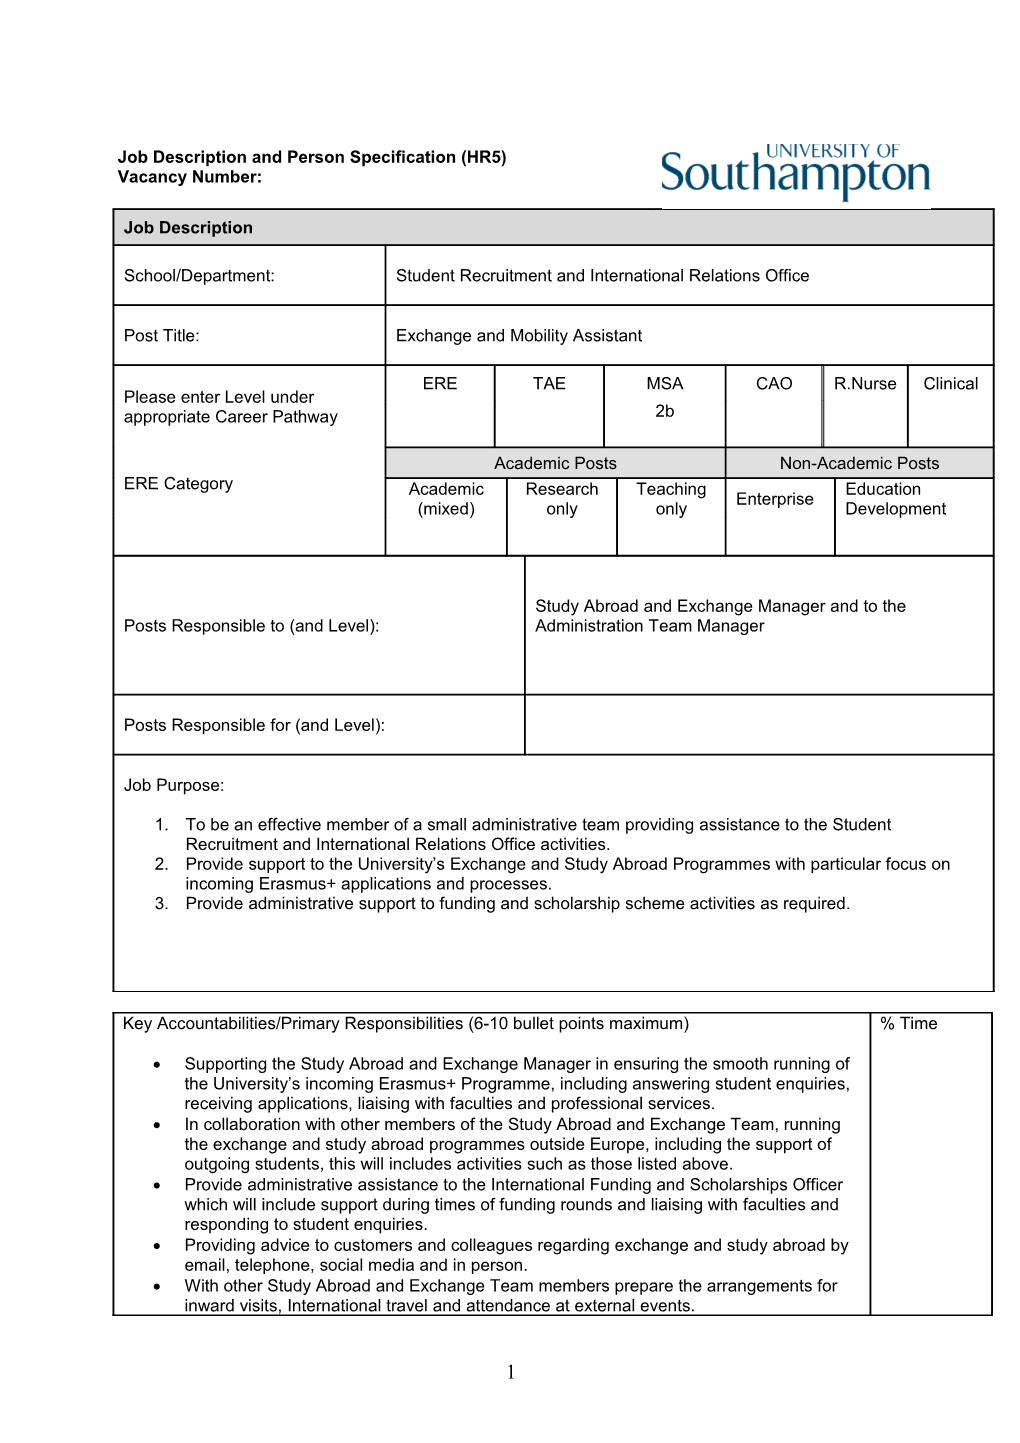 Job Hazard Analysis Form - Appendix to Job and Person Specification s1